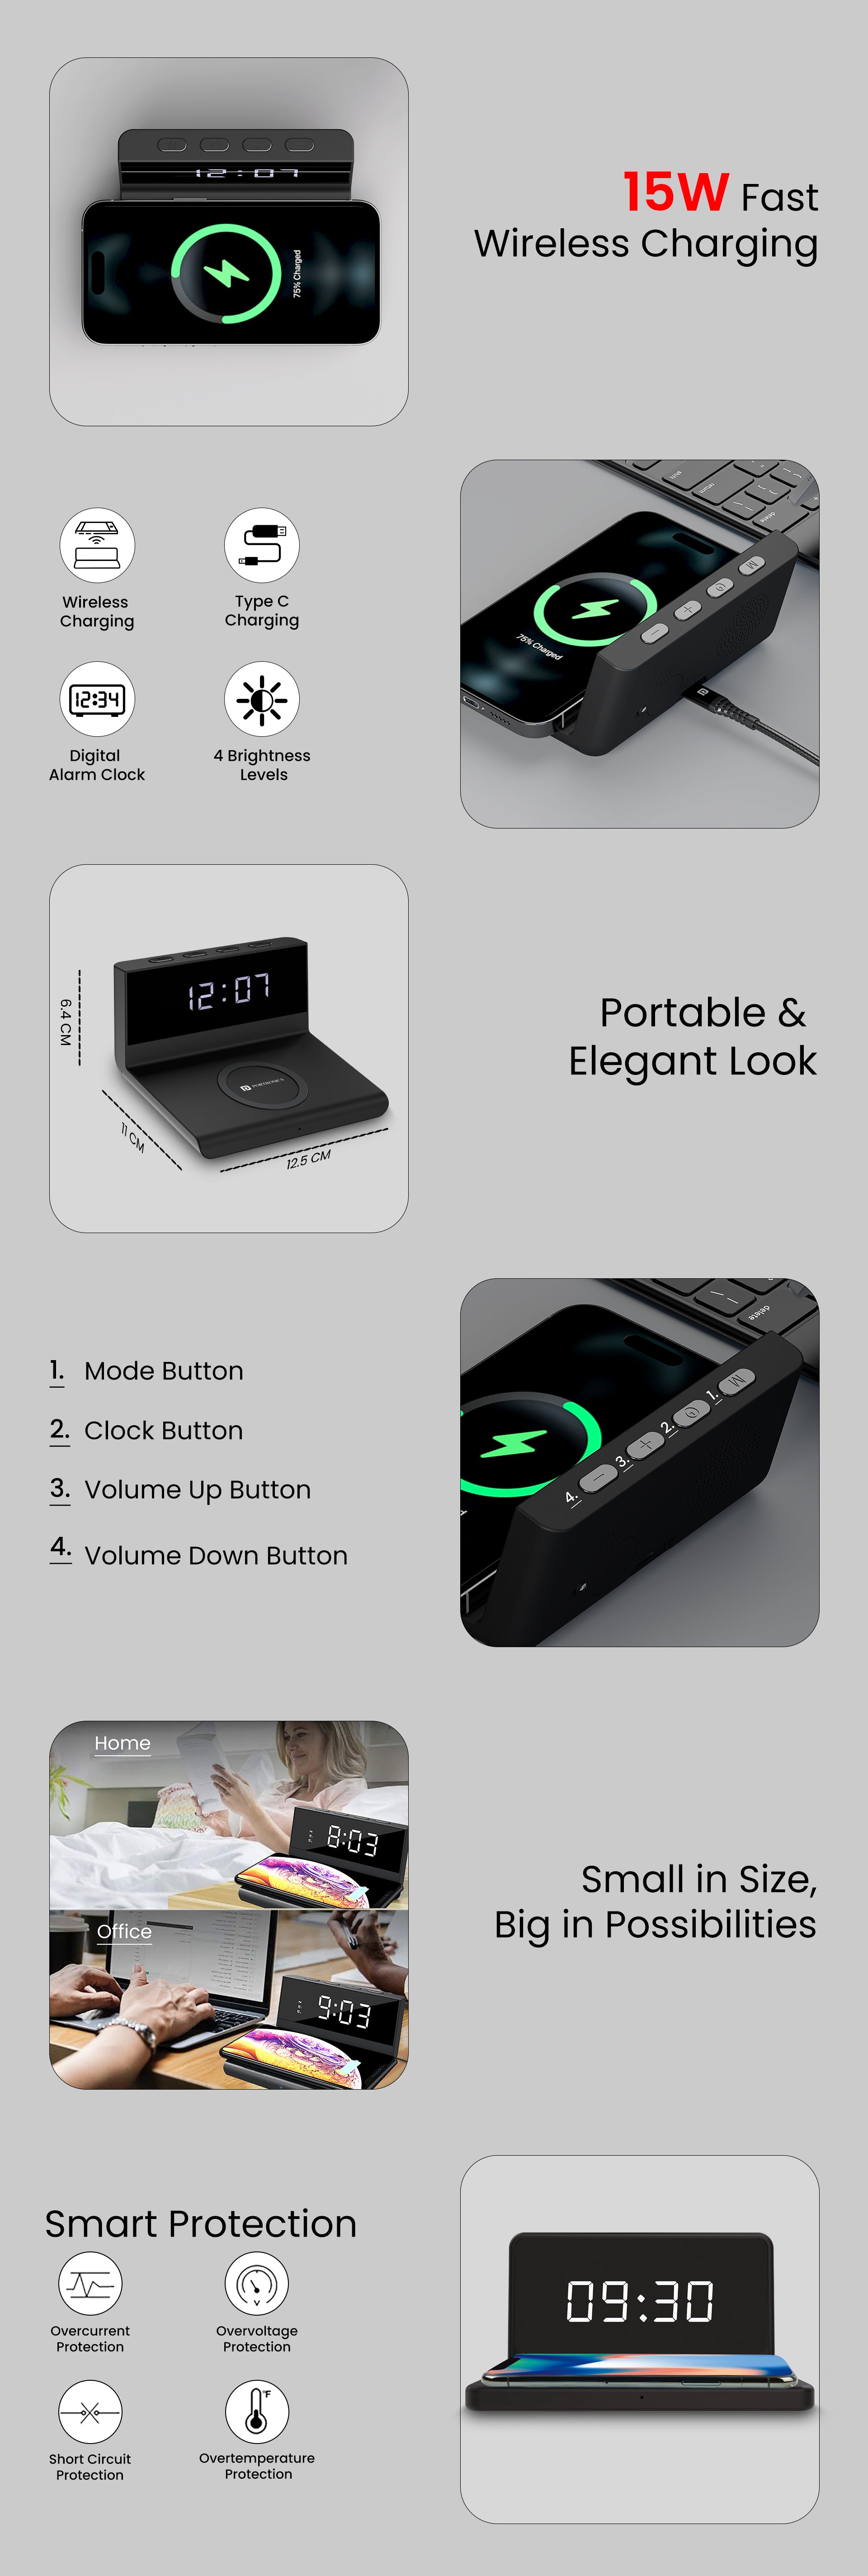 Portronics Freedom 4 Desktop Wireless Mobile Charger